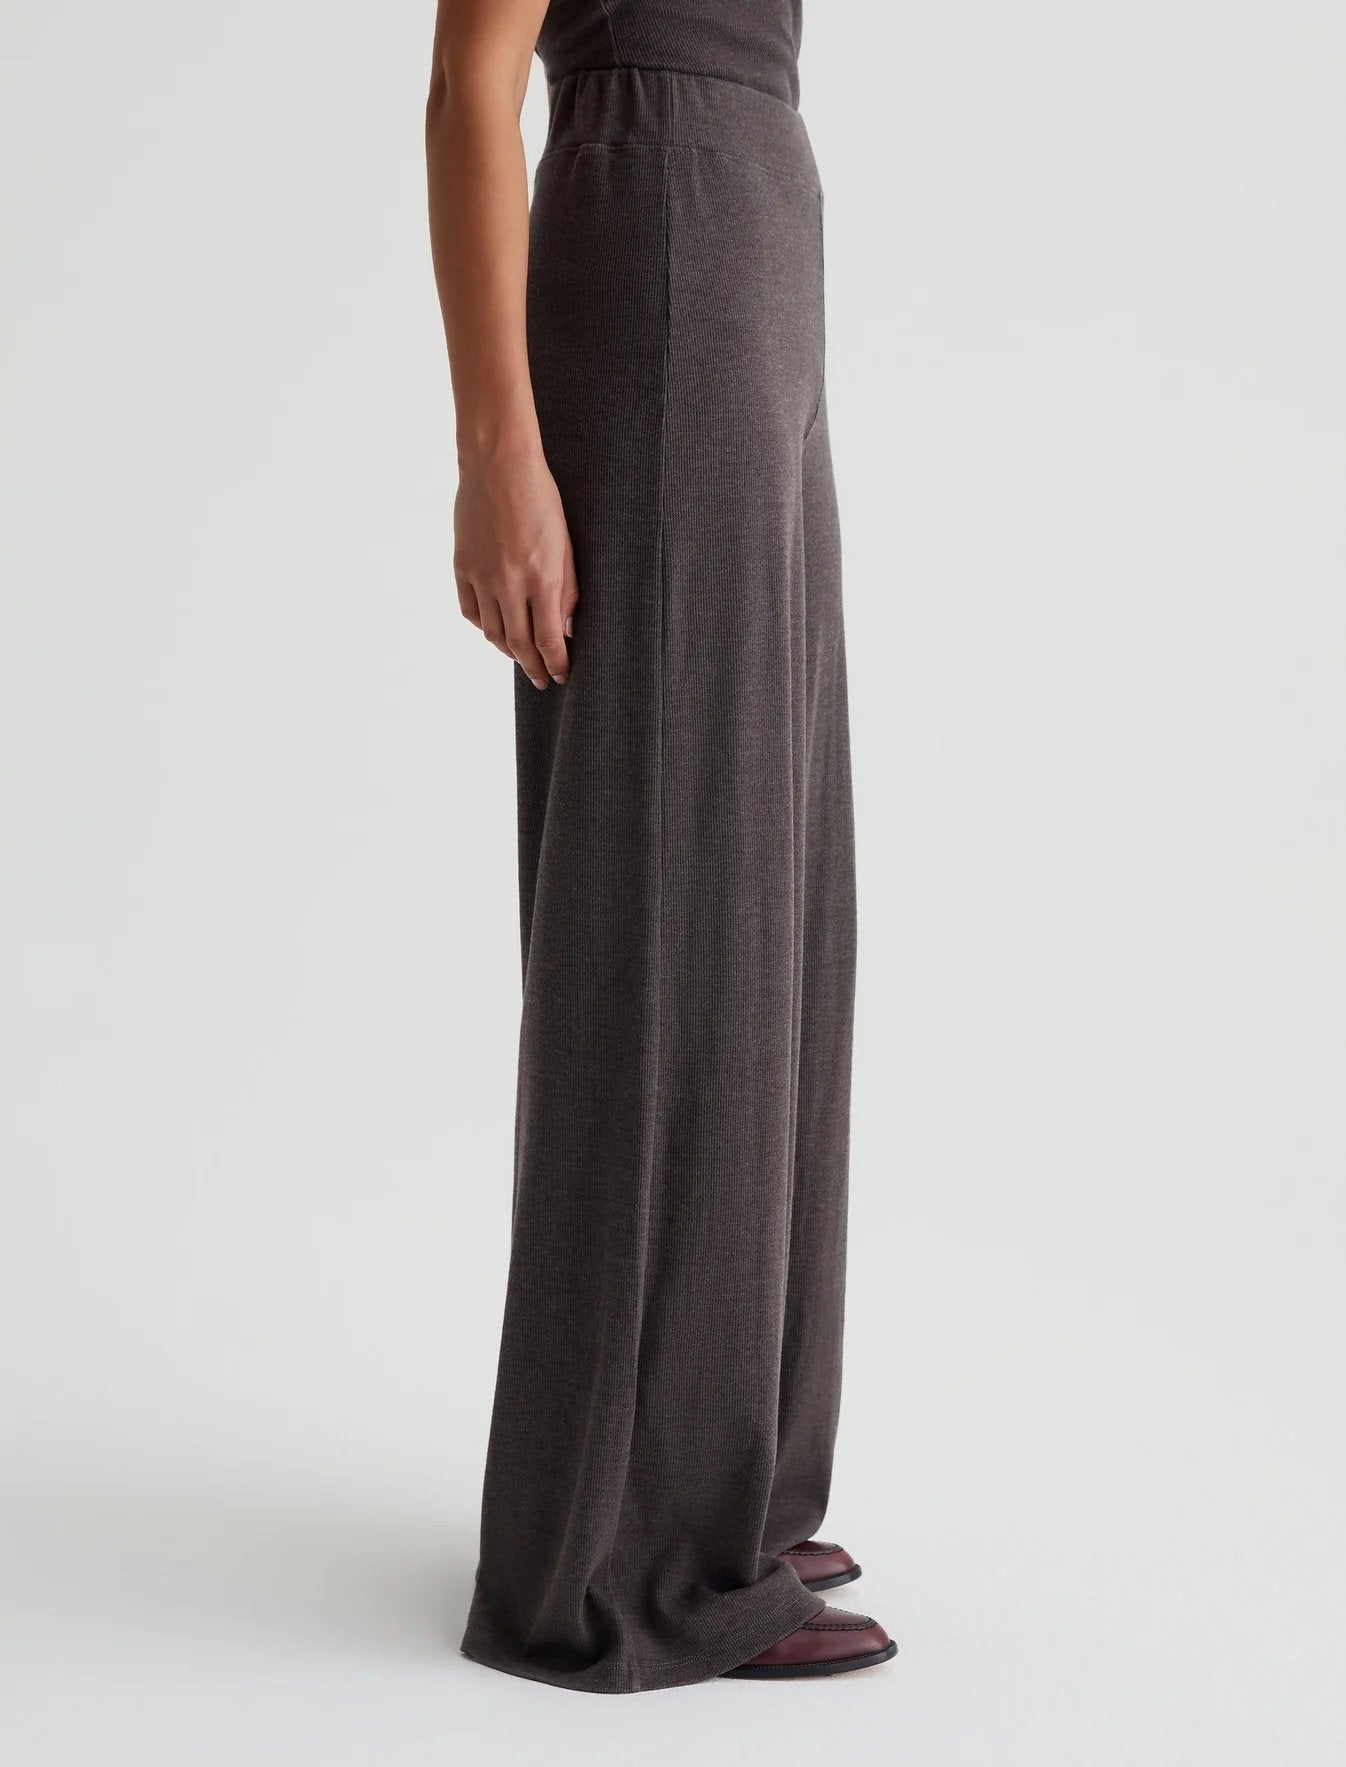 Sourie Ribbed Wide Leg Pant - AG Jeans - Danali - MSR1E18-STOW-XS